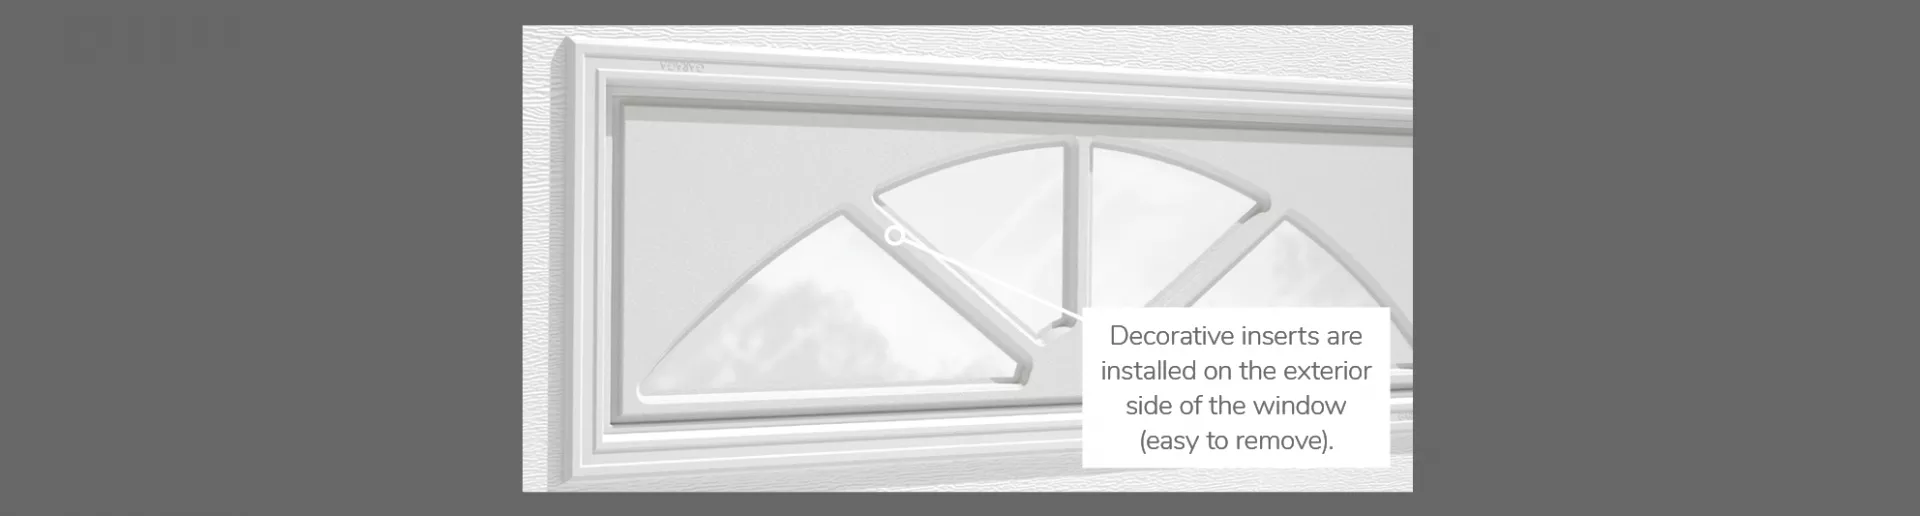 Sherwood Decorative Insert, 40" x 13", 21" x 13" or 41" x 16", available for door R-16, R-12, 3 layers - Polystyrene, 2 layers - Polystyrene and Non-insulated